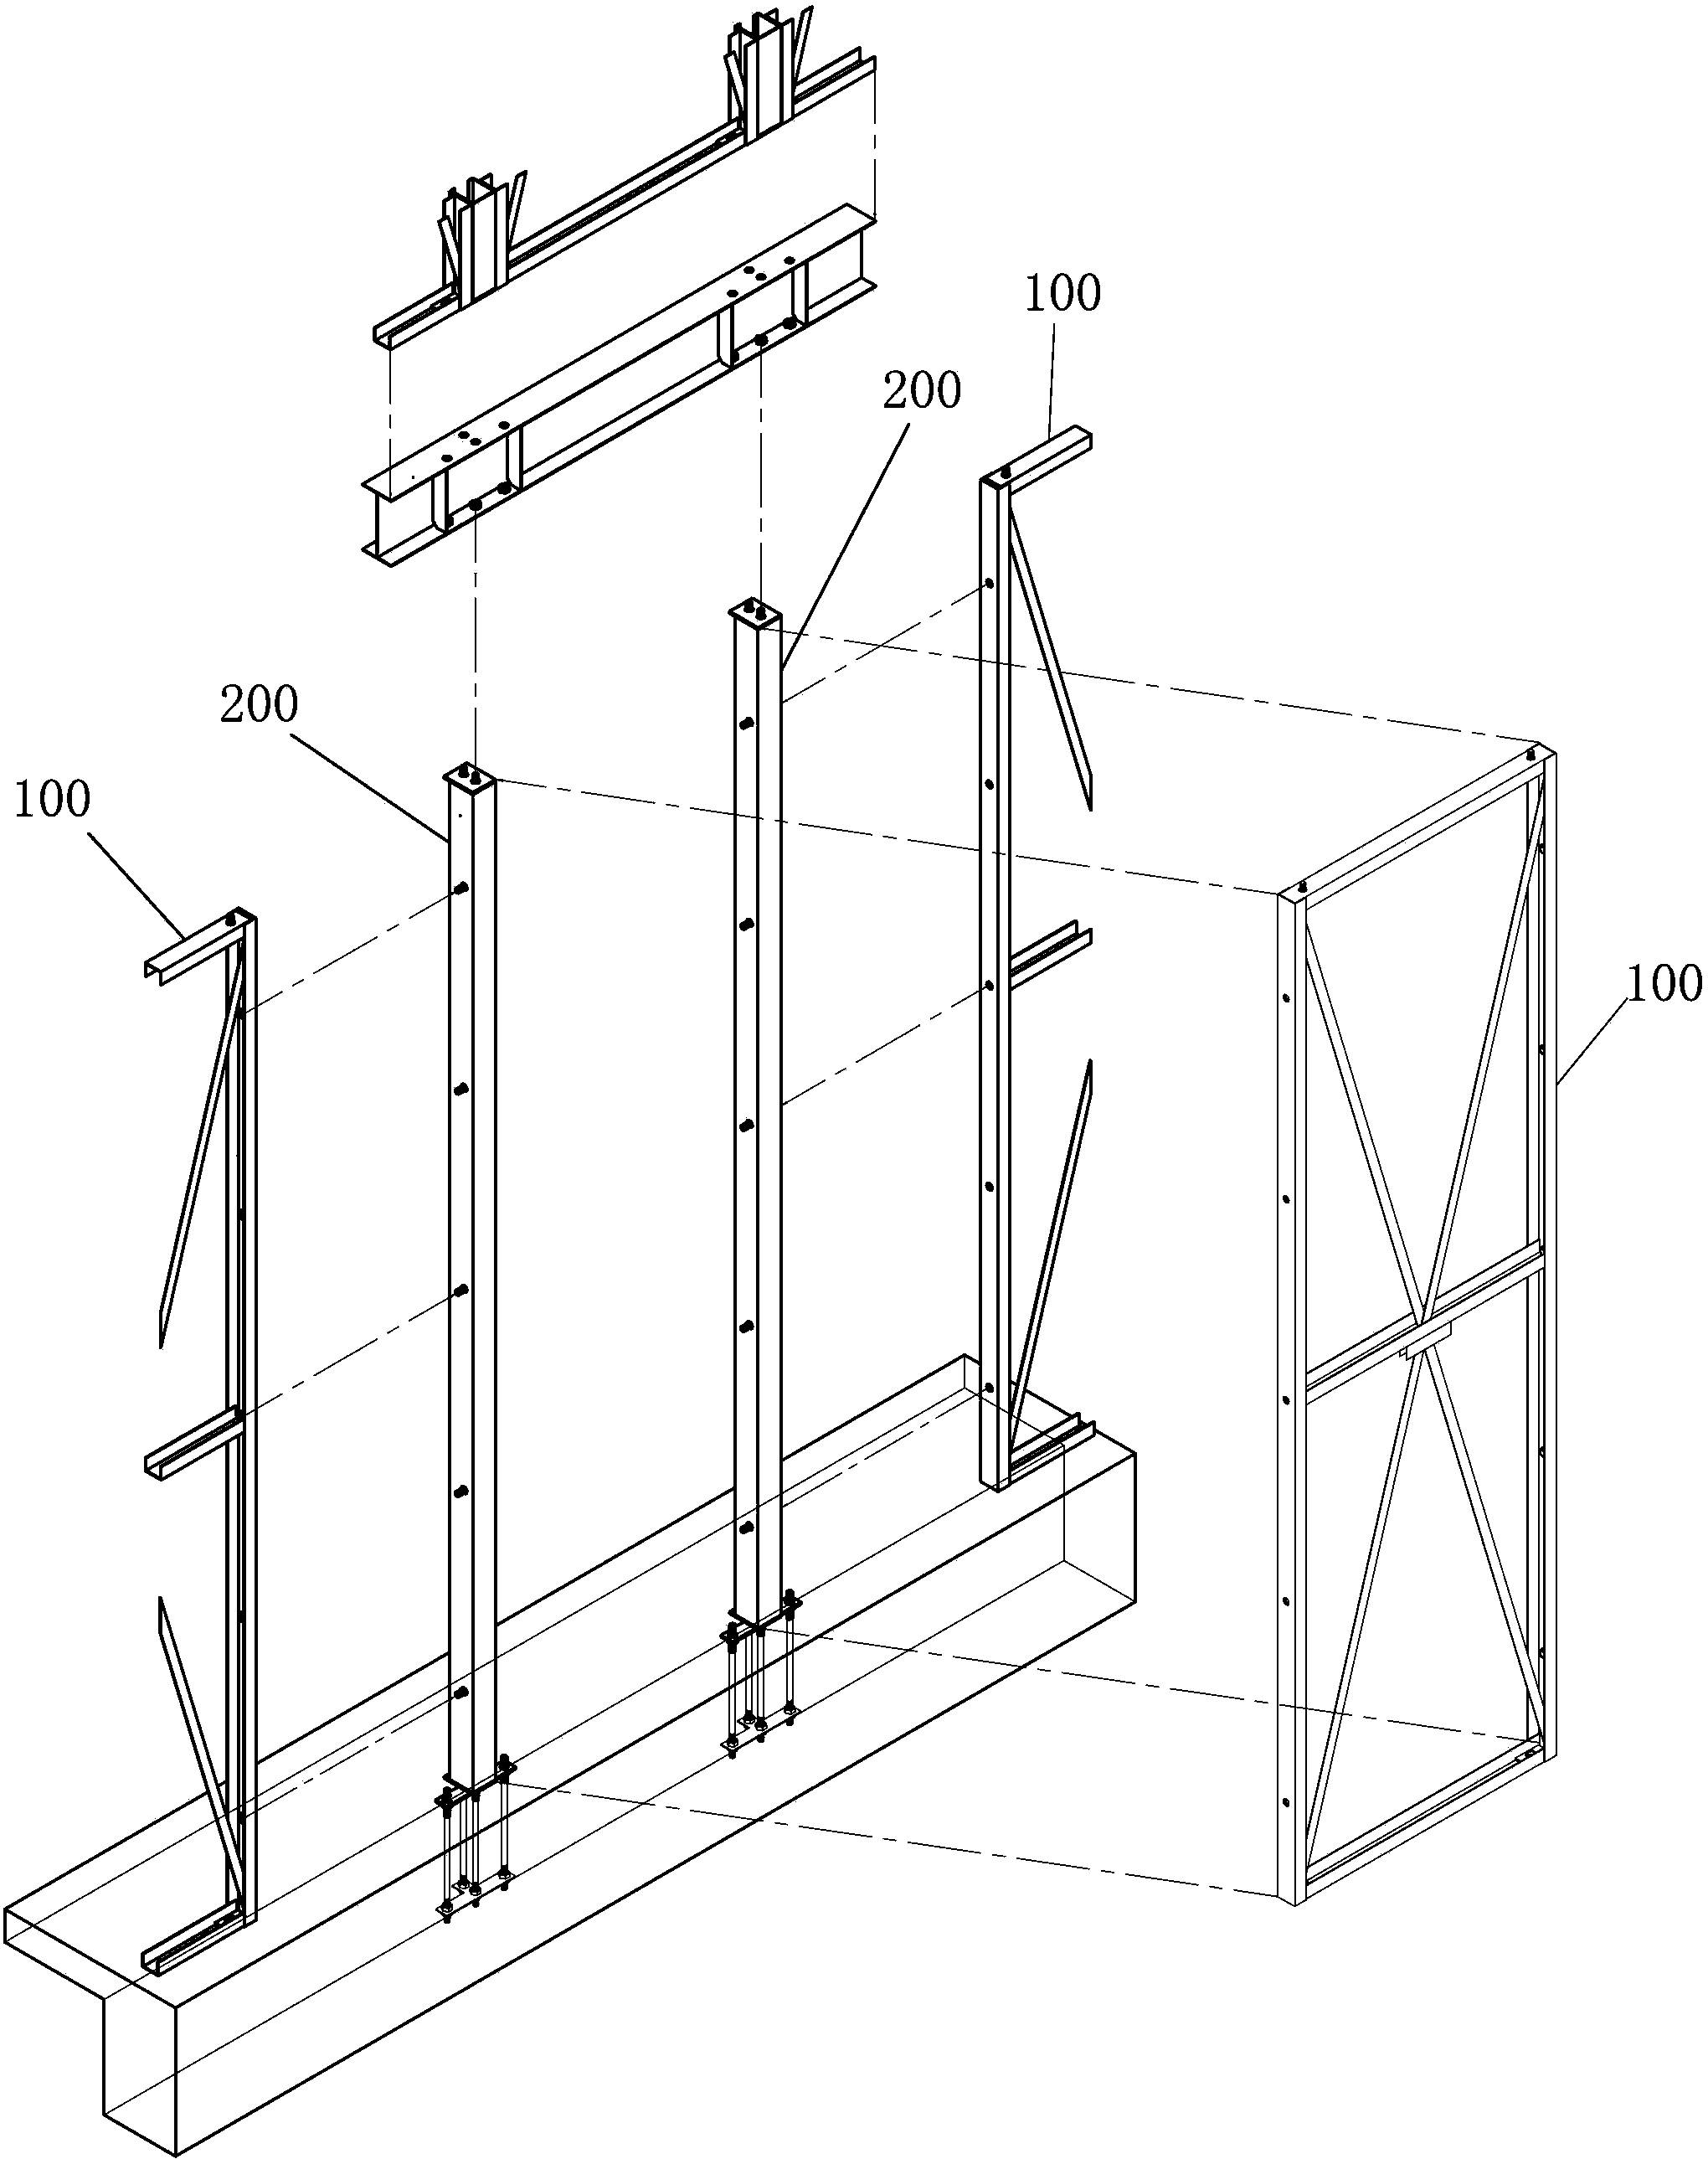 Light-steel industrialized residential structure system